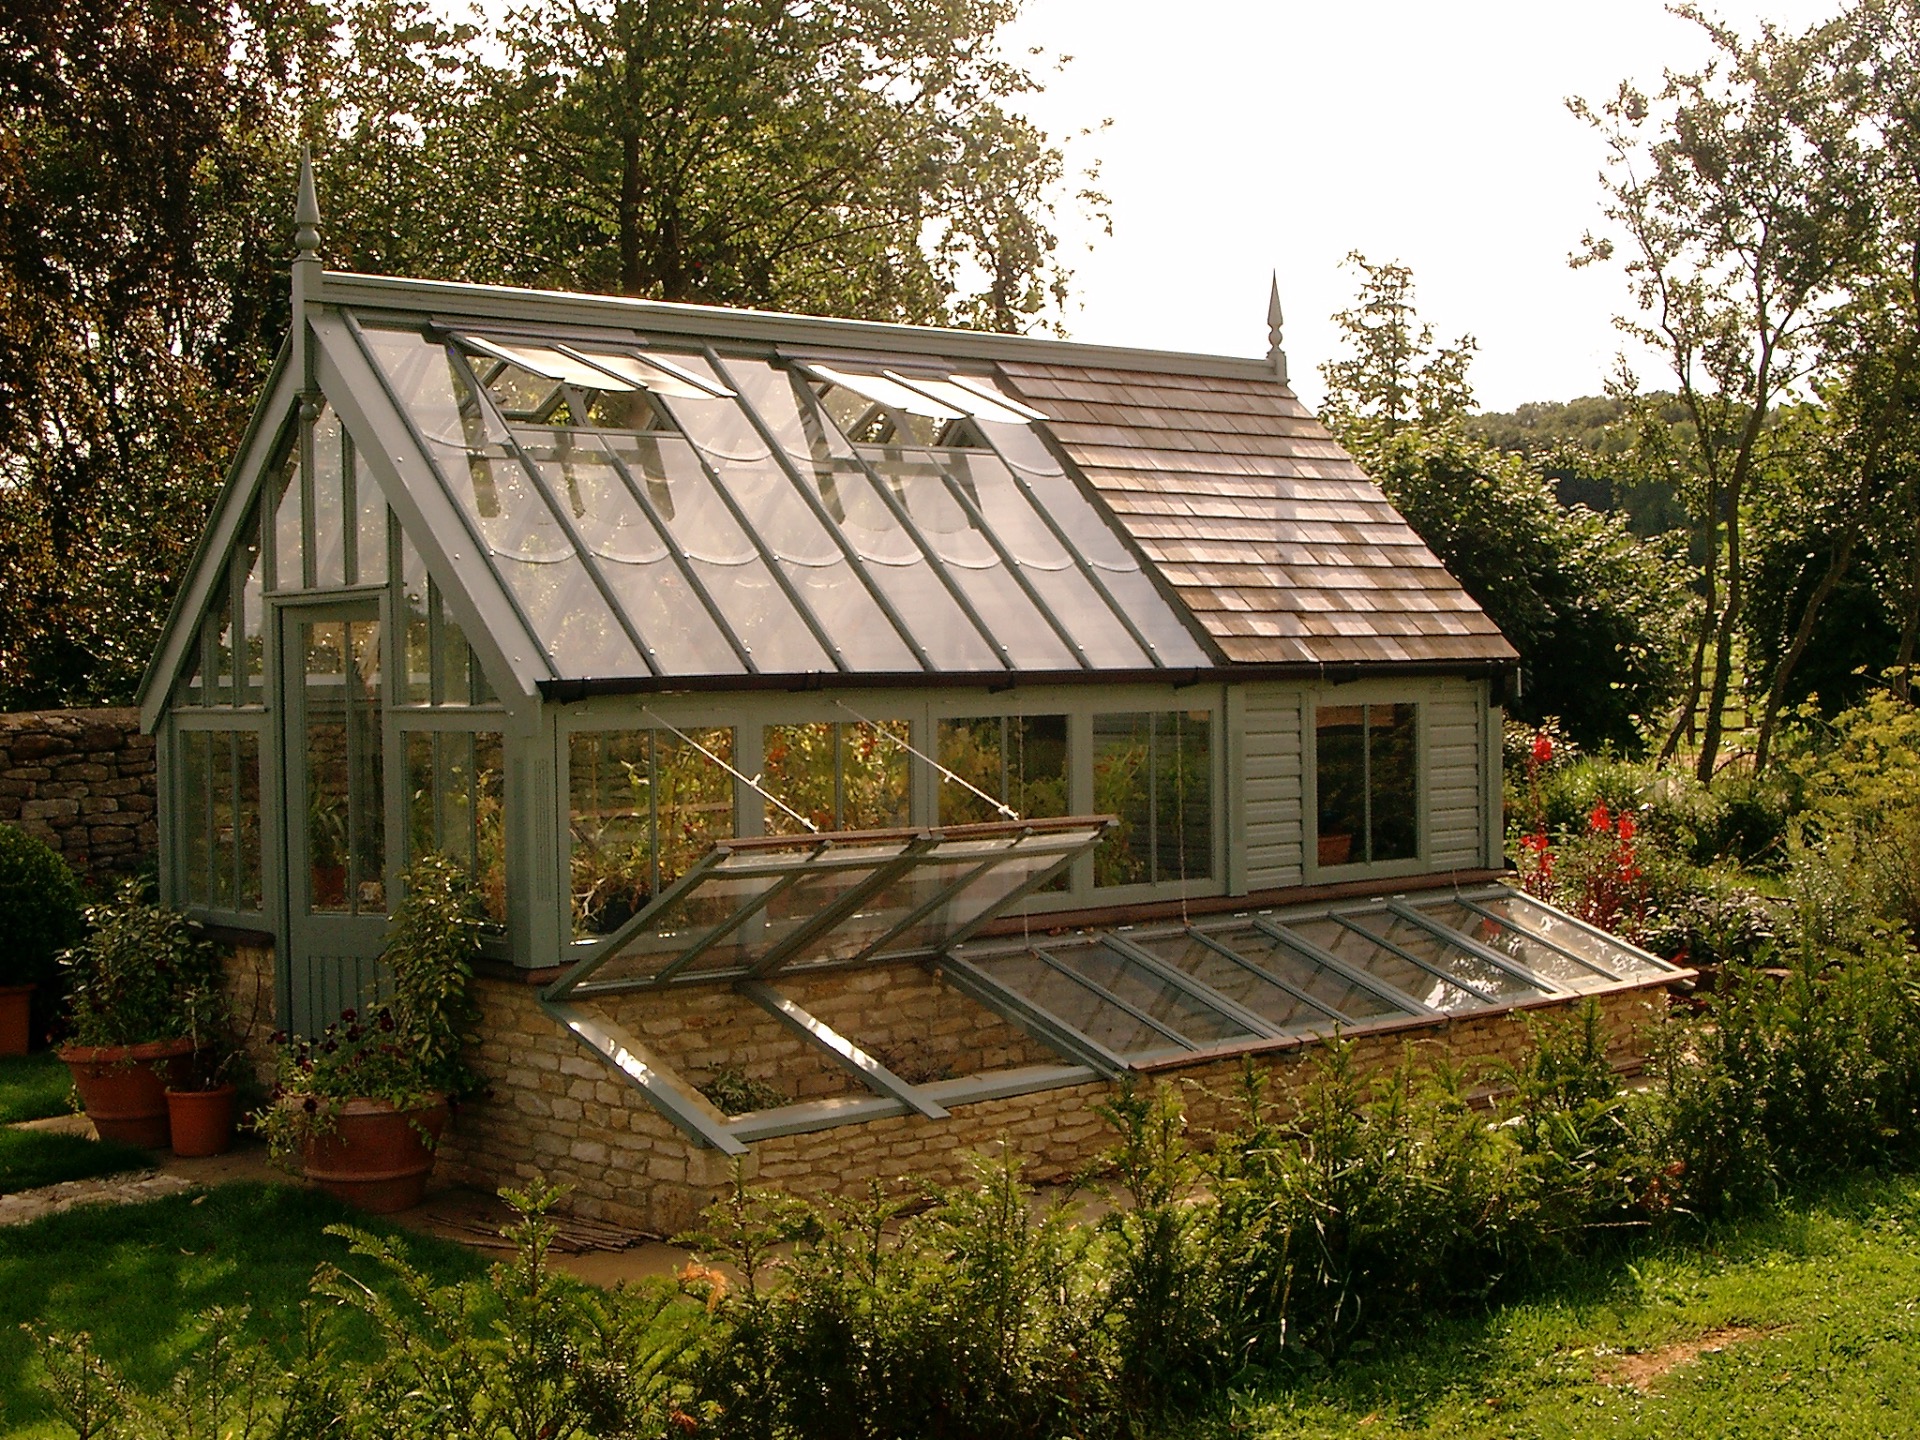 Greenhouse and potting shed combination